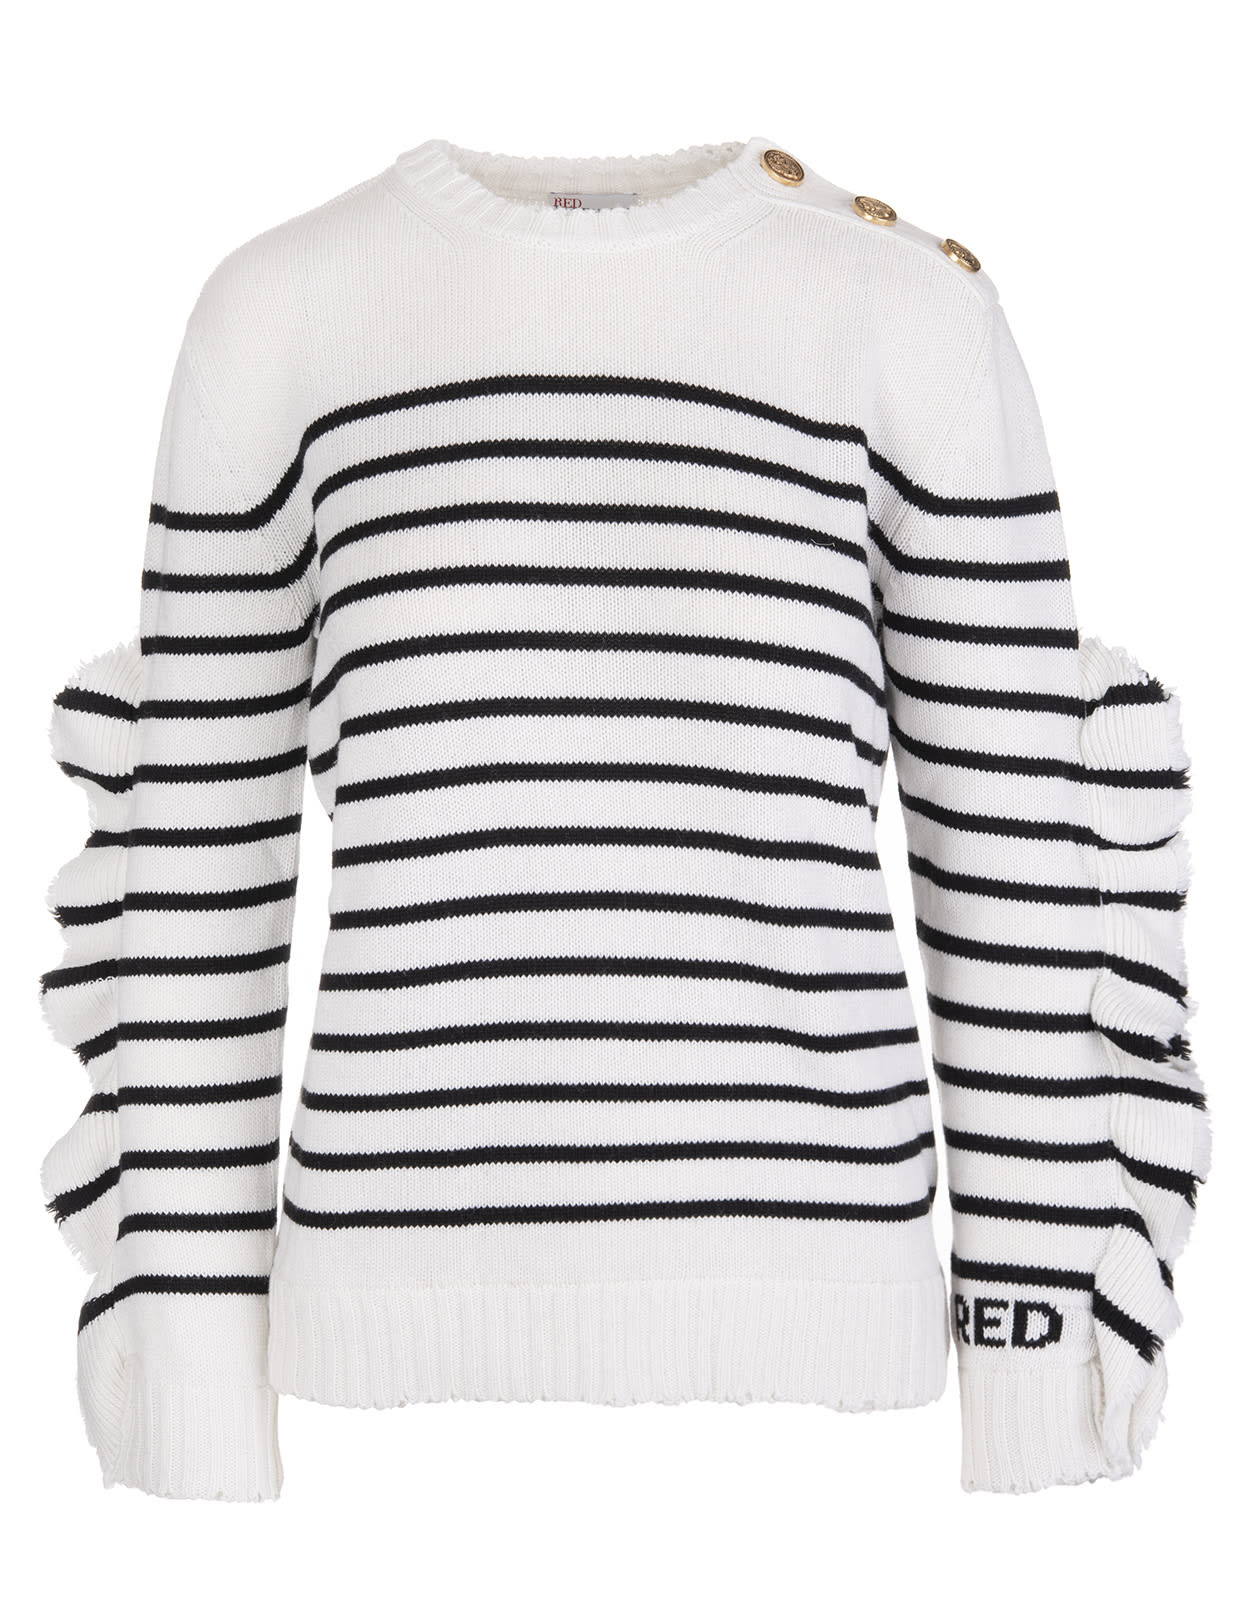 RED Valentino White And Black Striped Wool Blend Sweater With Ruches Detail